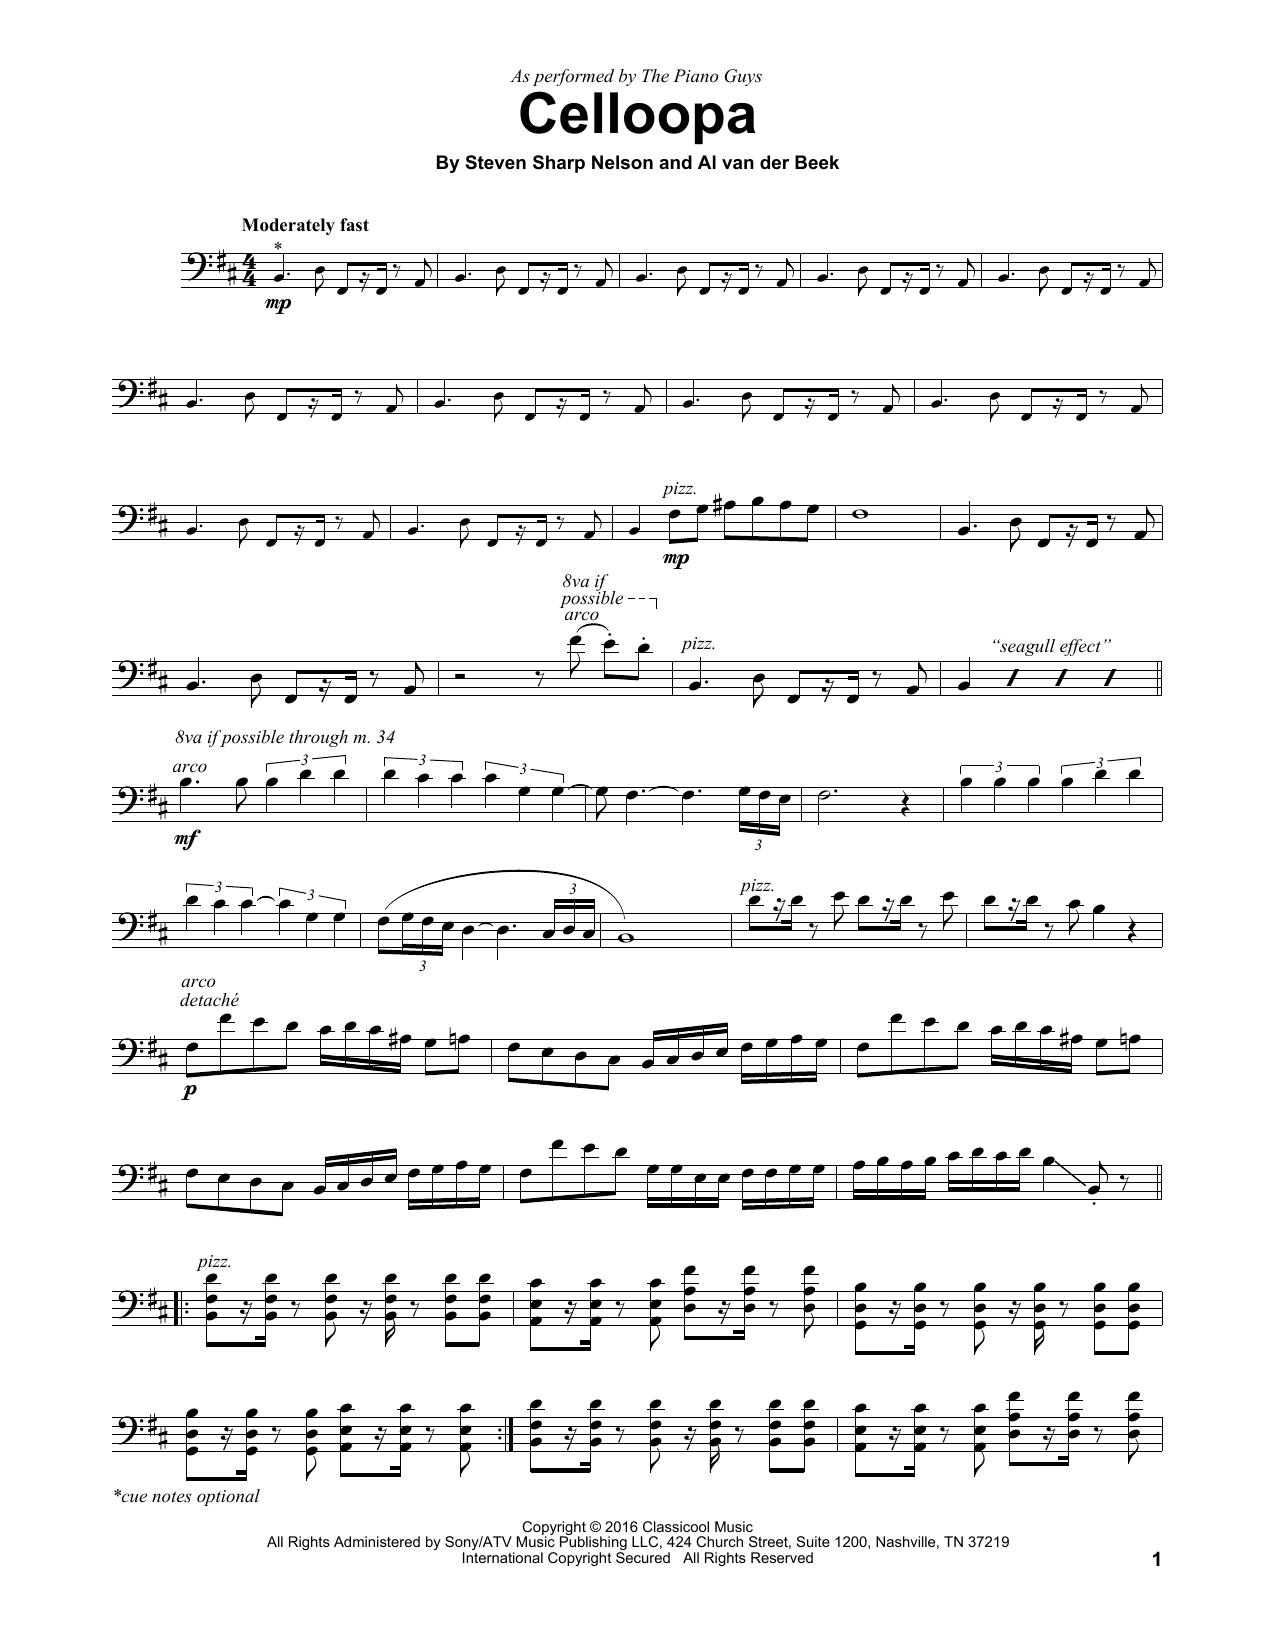 Download The Piano Guys Celloopa Sheet Music